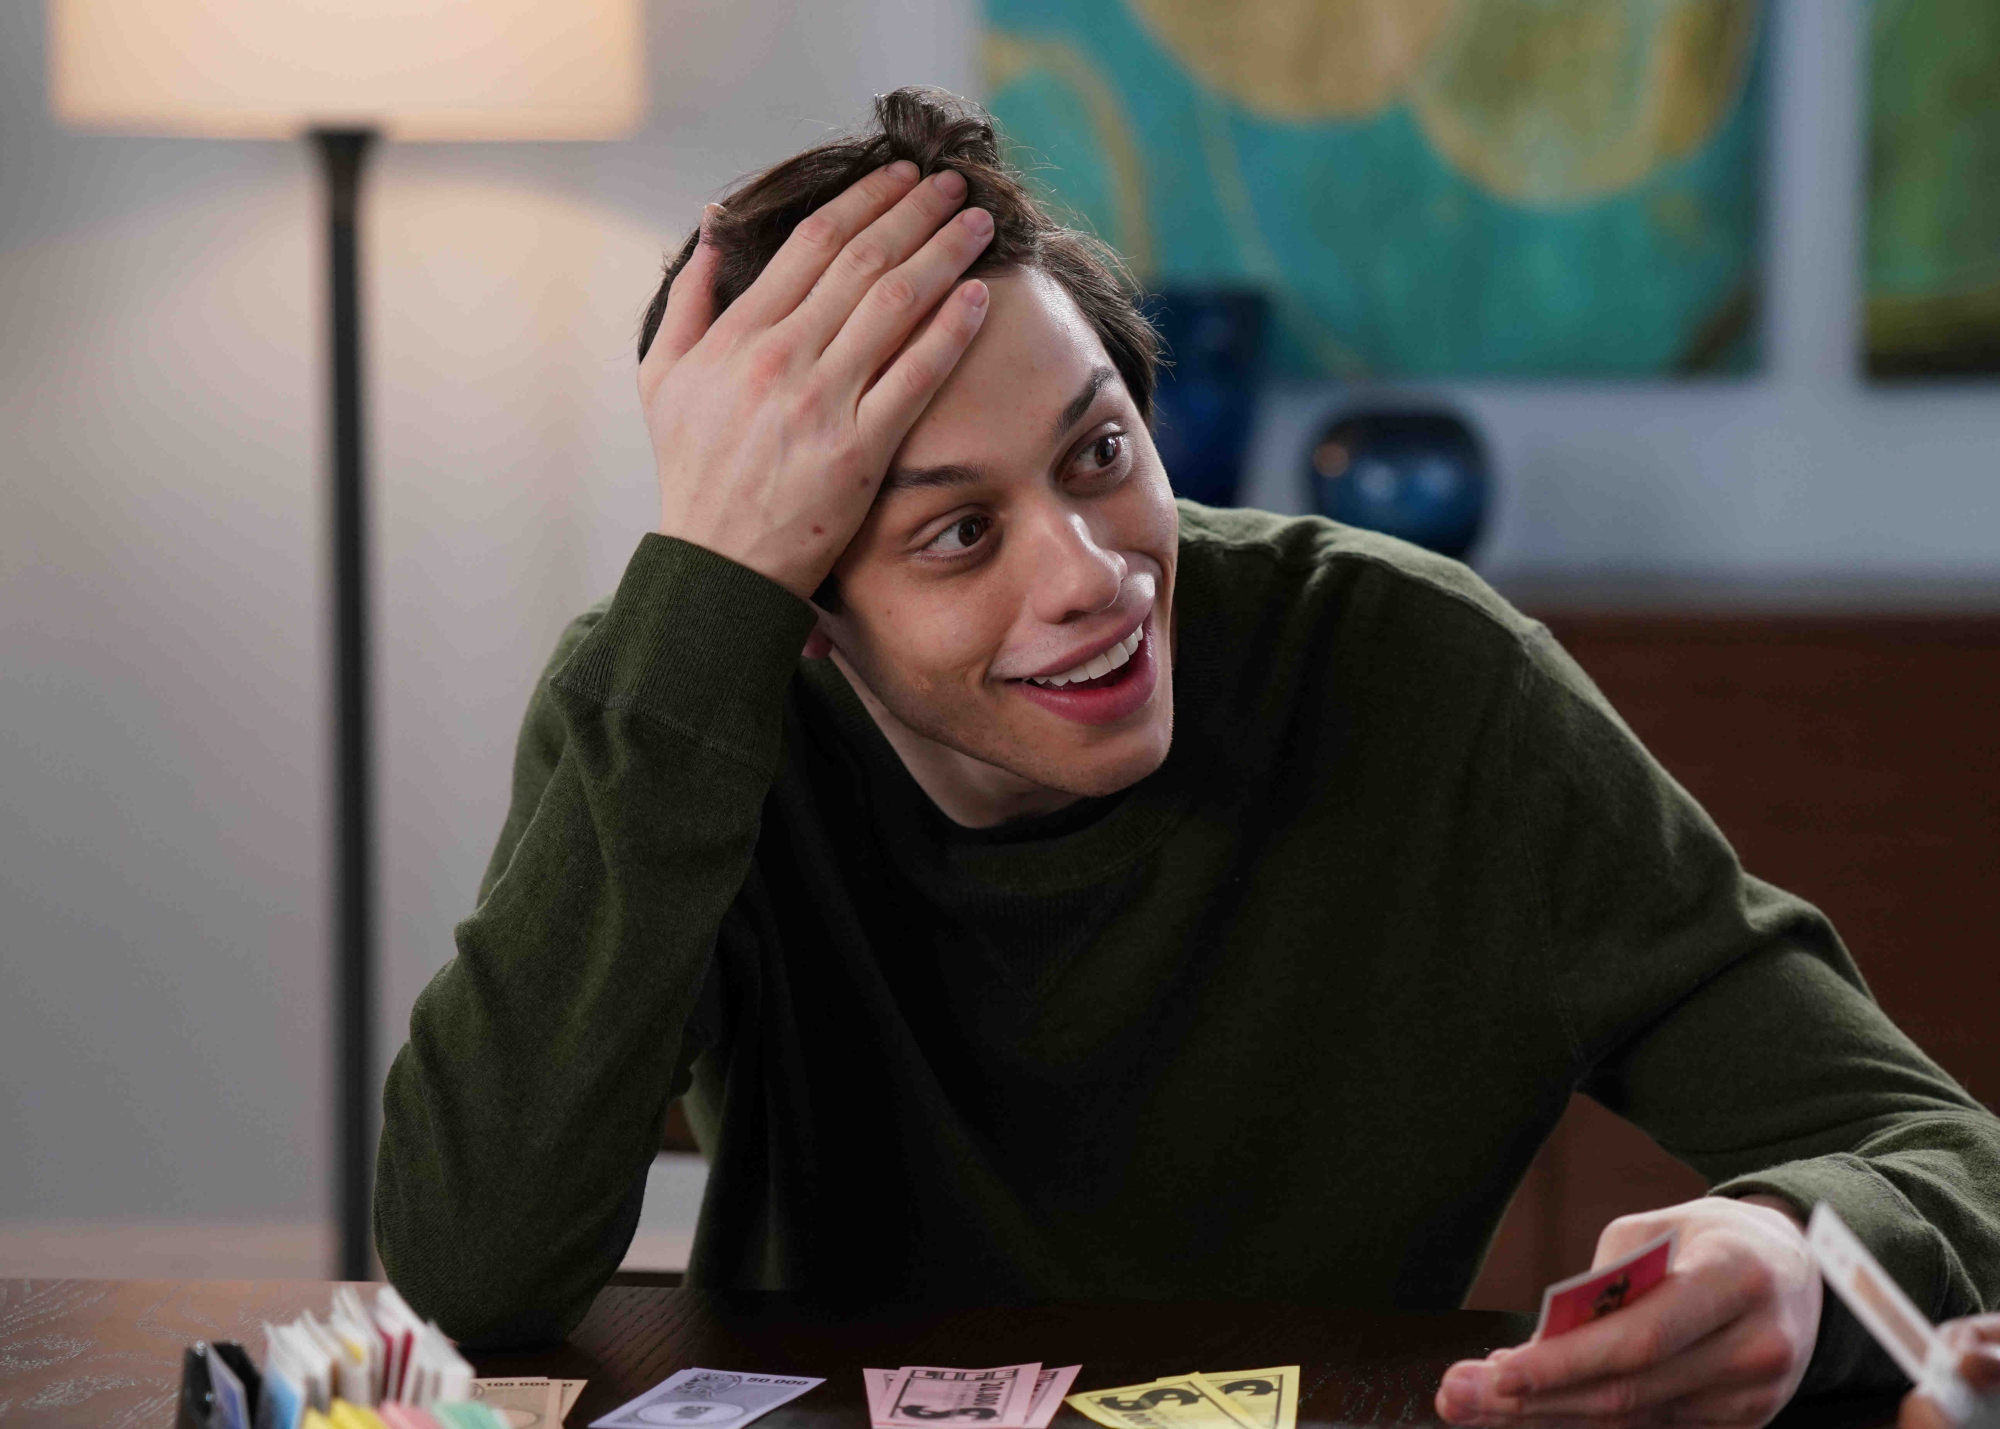 'Saturday Night Live' former cast member Pete Davidson with his hand on his forehead in disbelief.